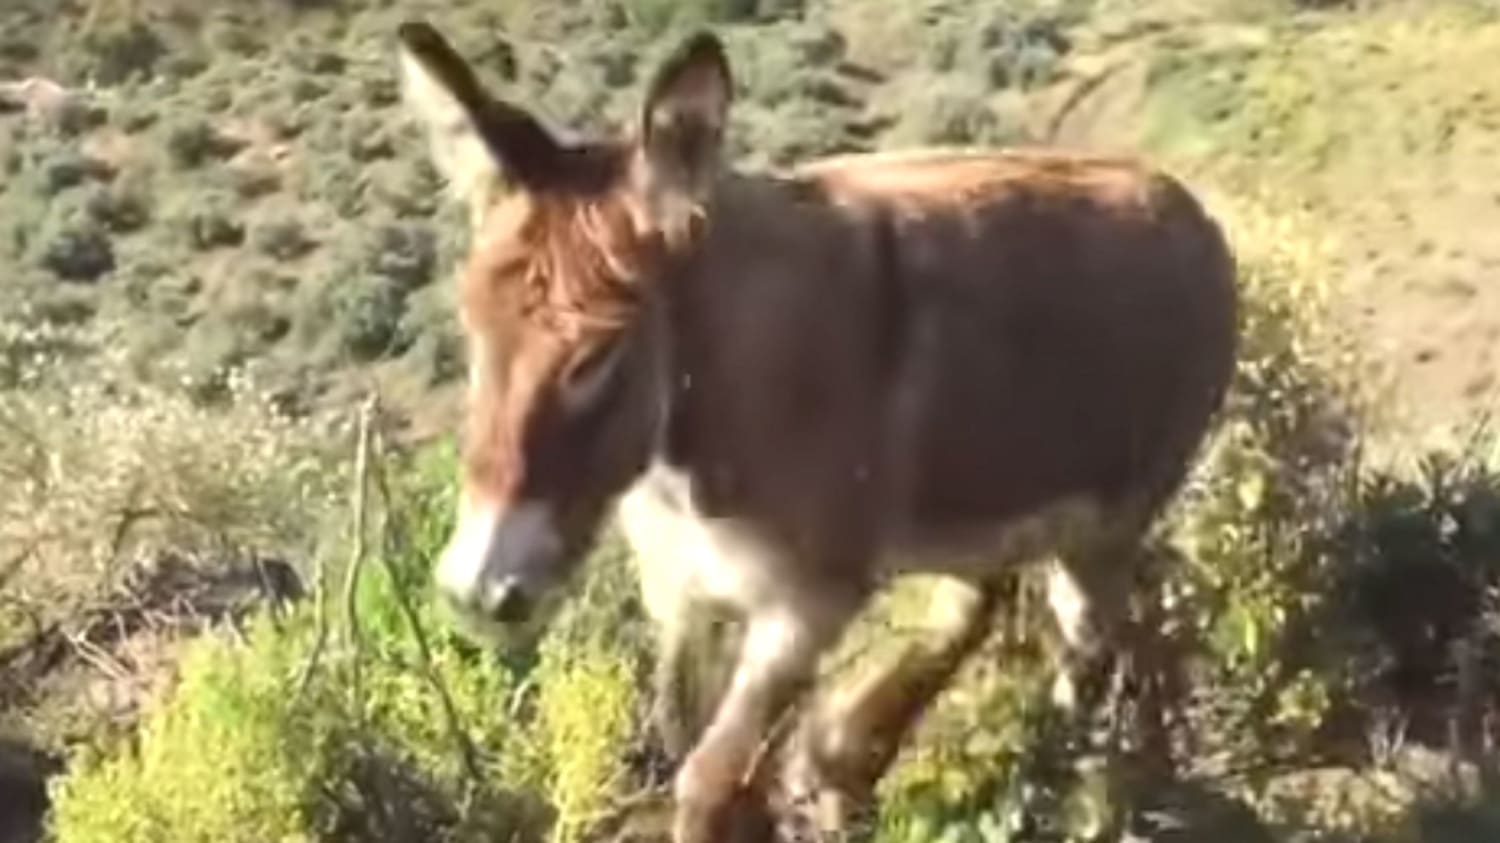 Man Enjoys The Sweetest Post-Lockdown Reunion With His Donkey